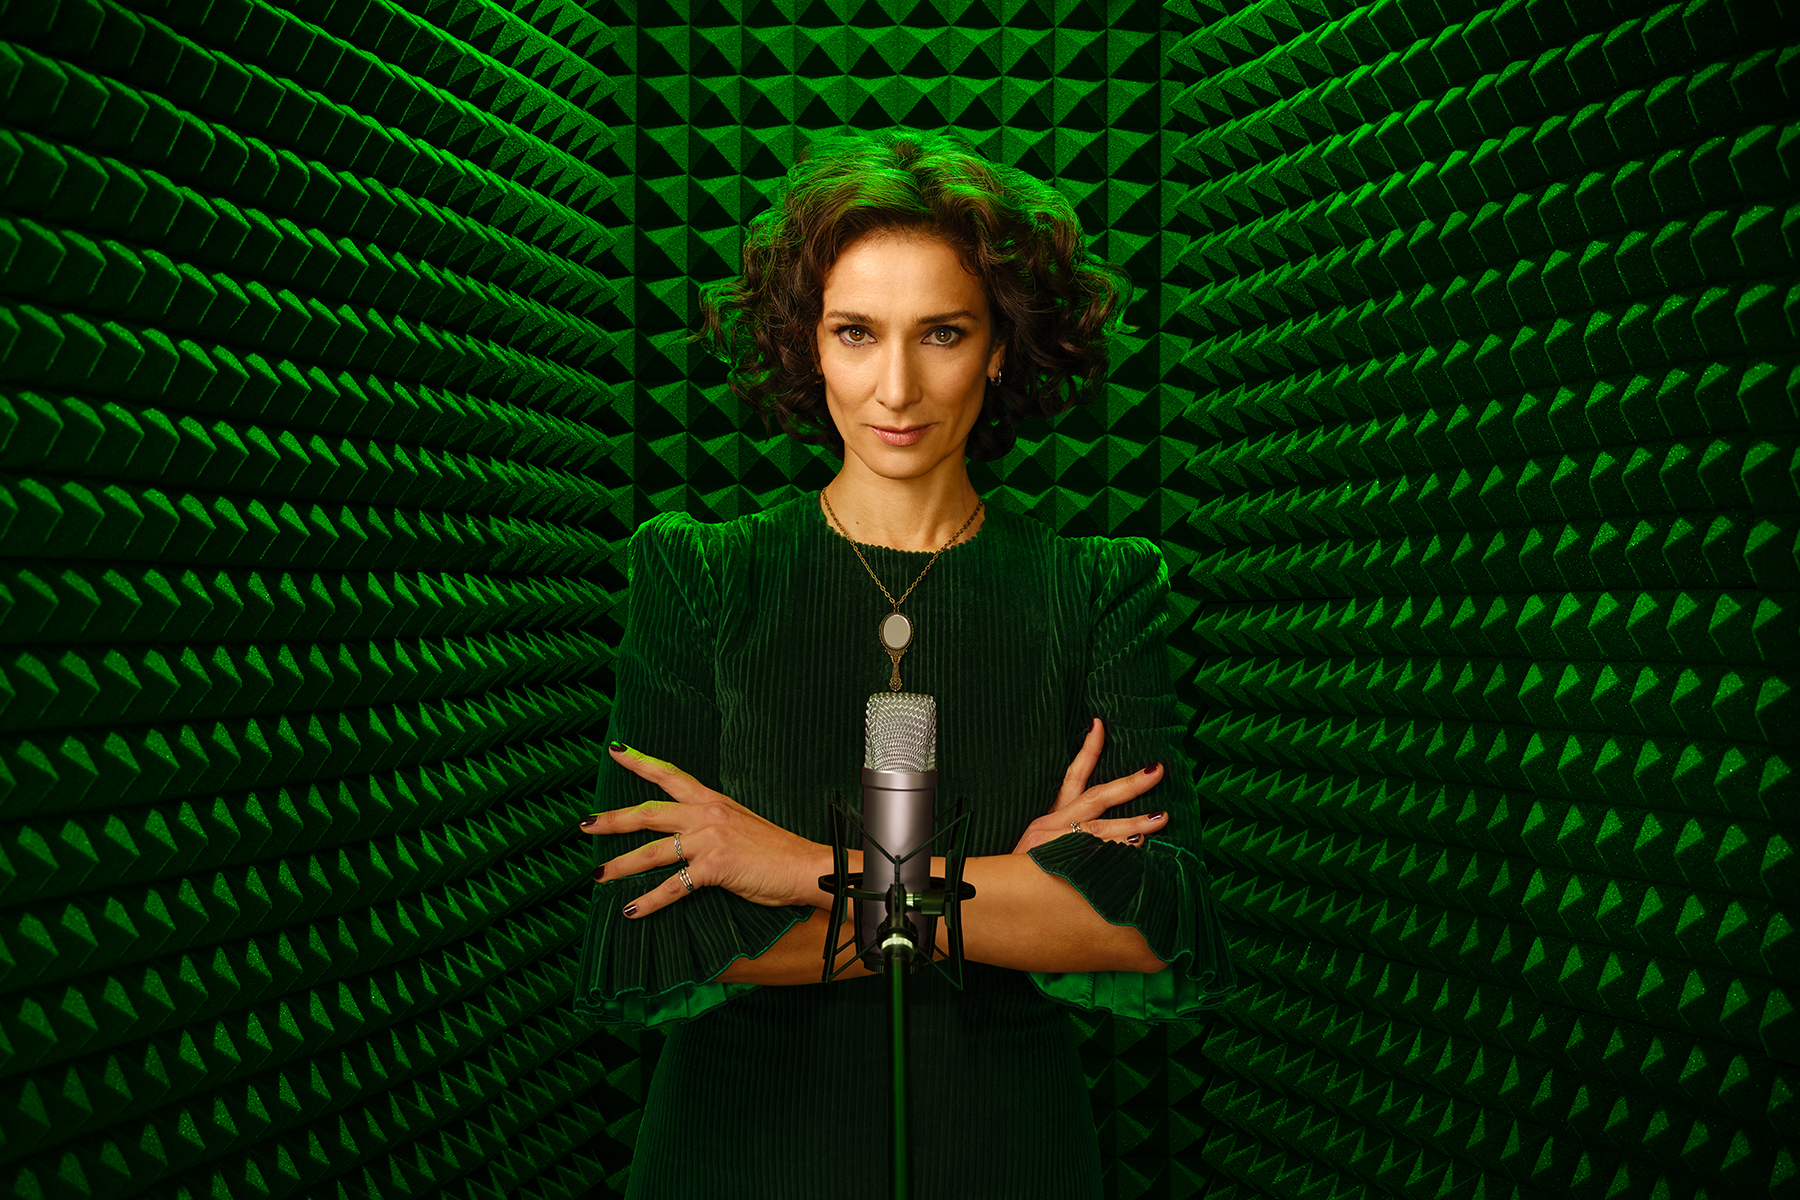 A photo of actor Indira Varma, in a green-lit sound booth.